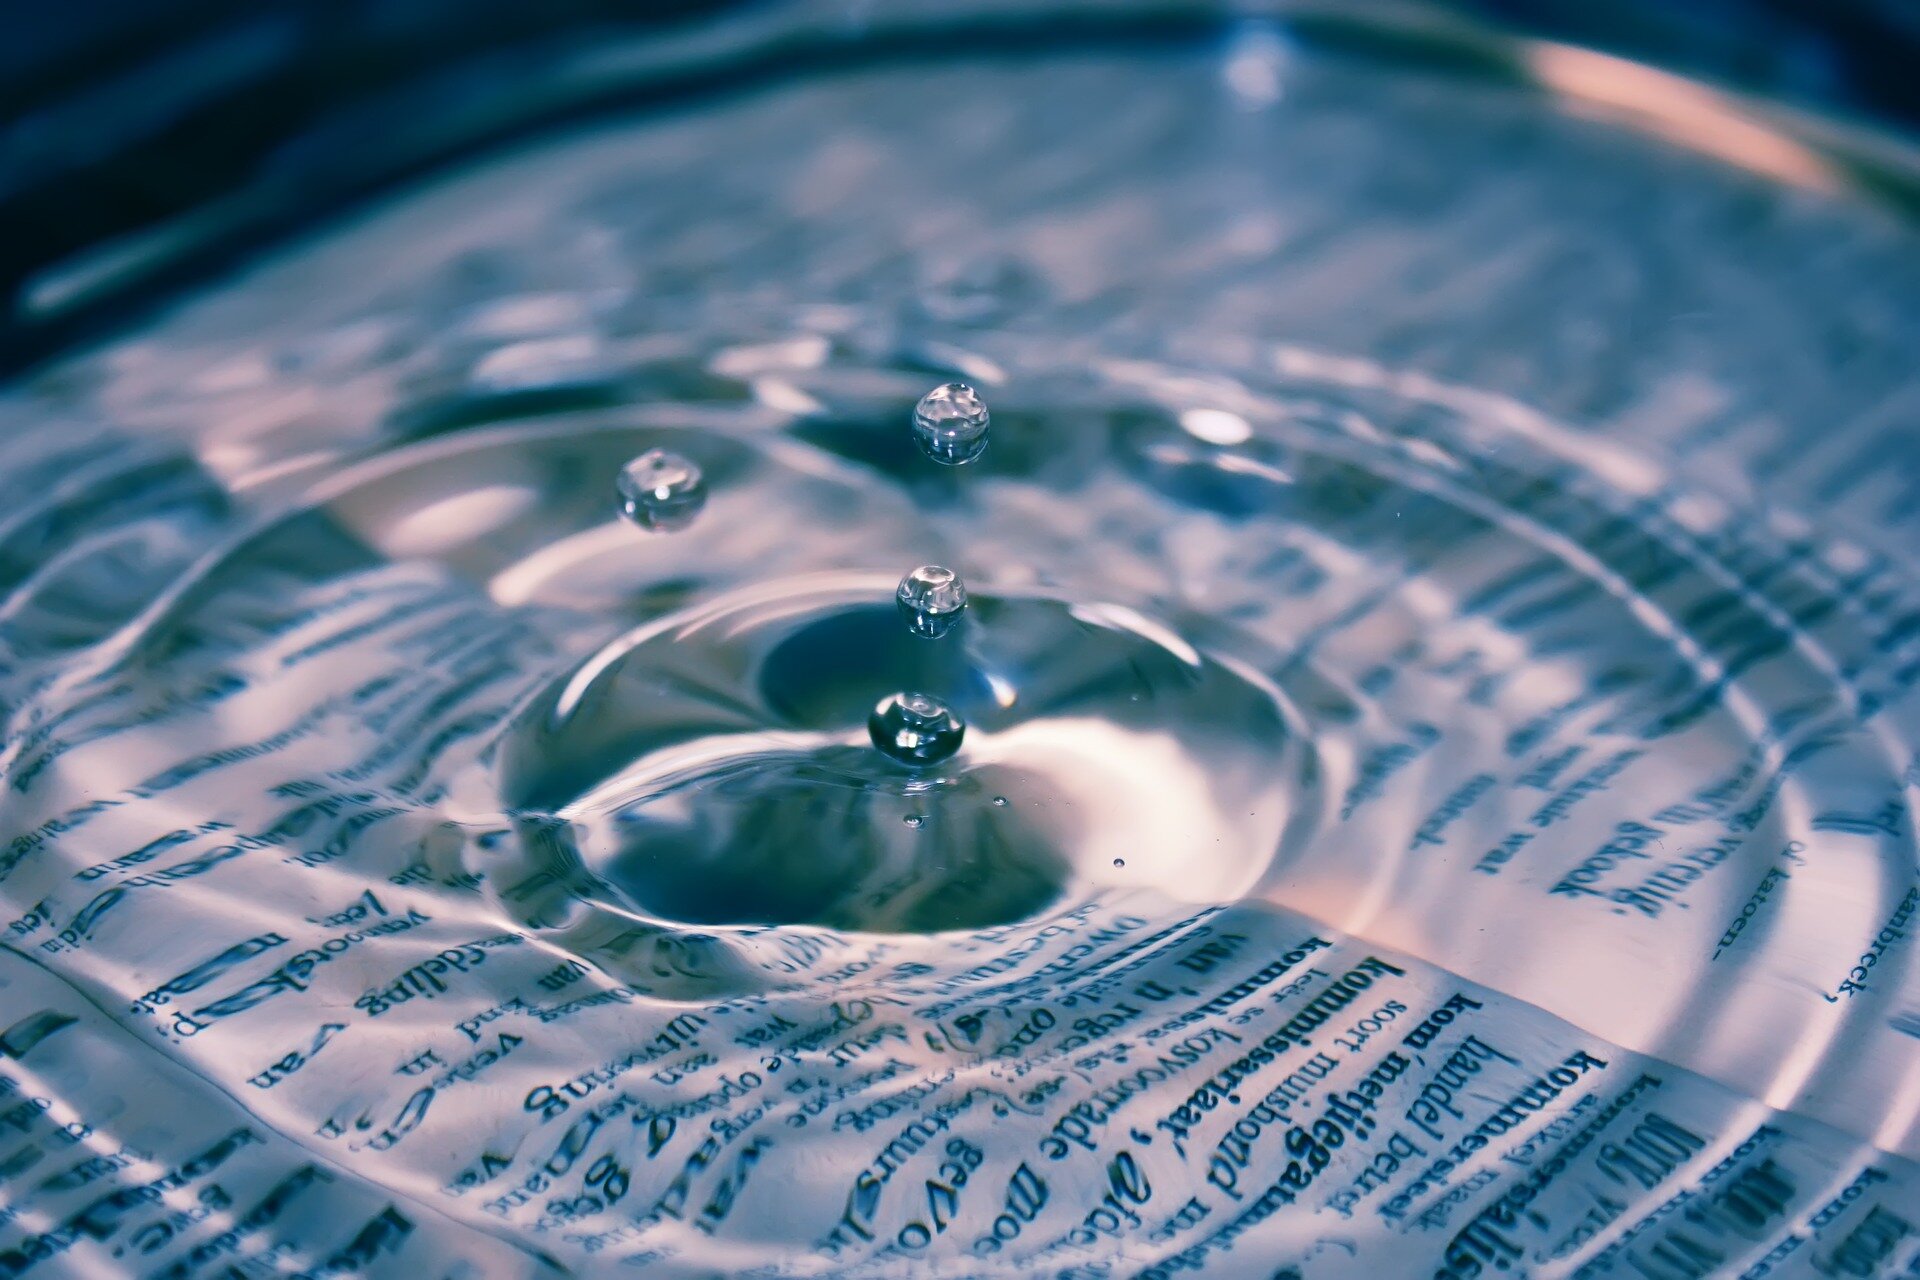 The fountain of life: Water droplets hold the secret ingredient for building lif..